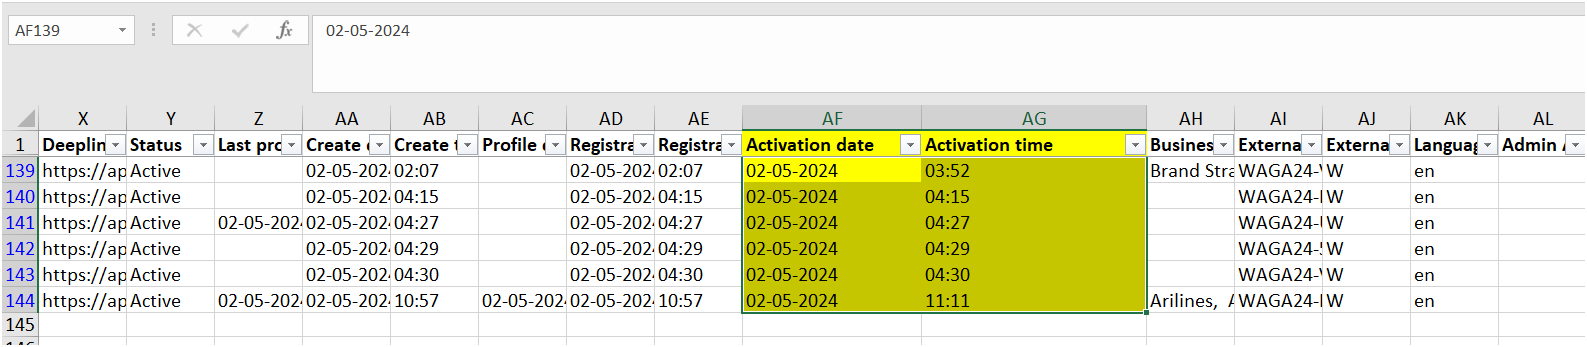 Timestamp of account activation